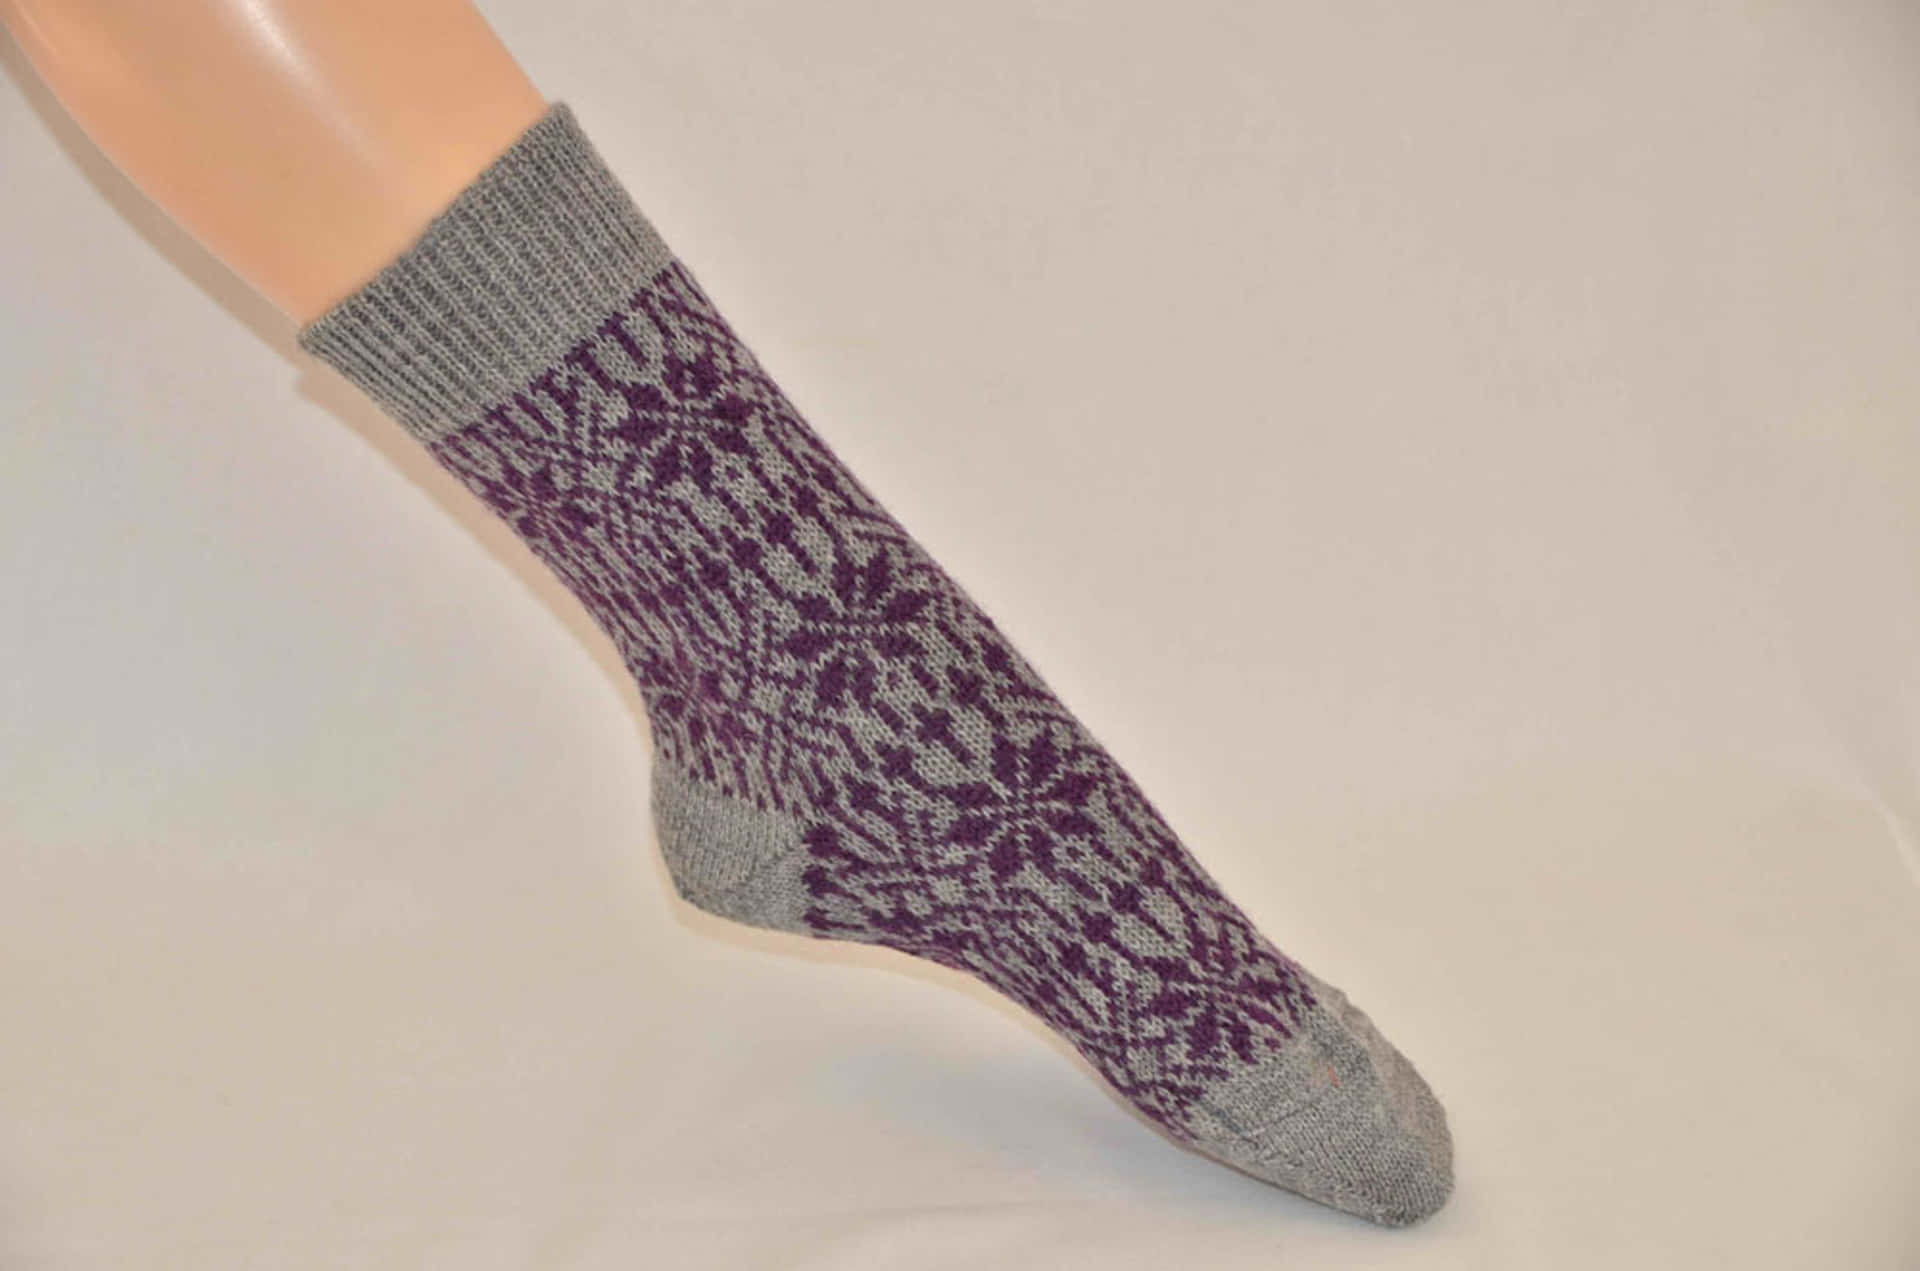 "Step up your style game with a splash of Purple Socks!" Wallpaper